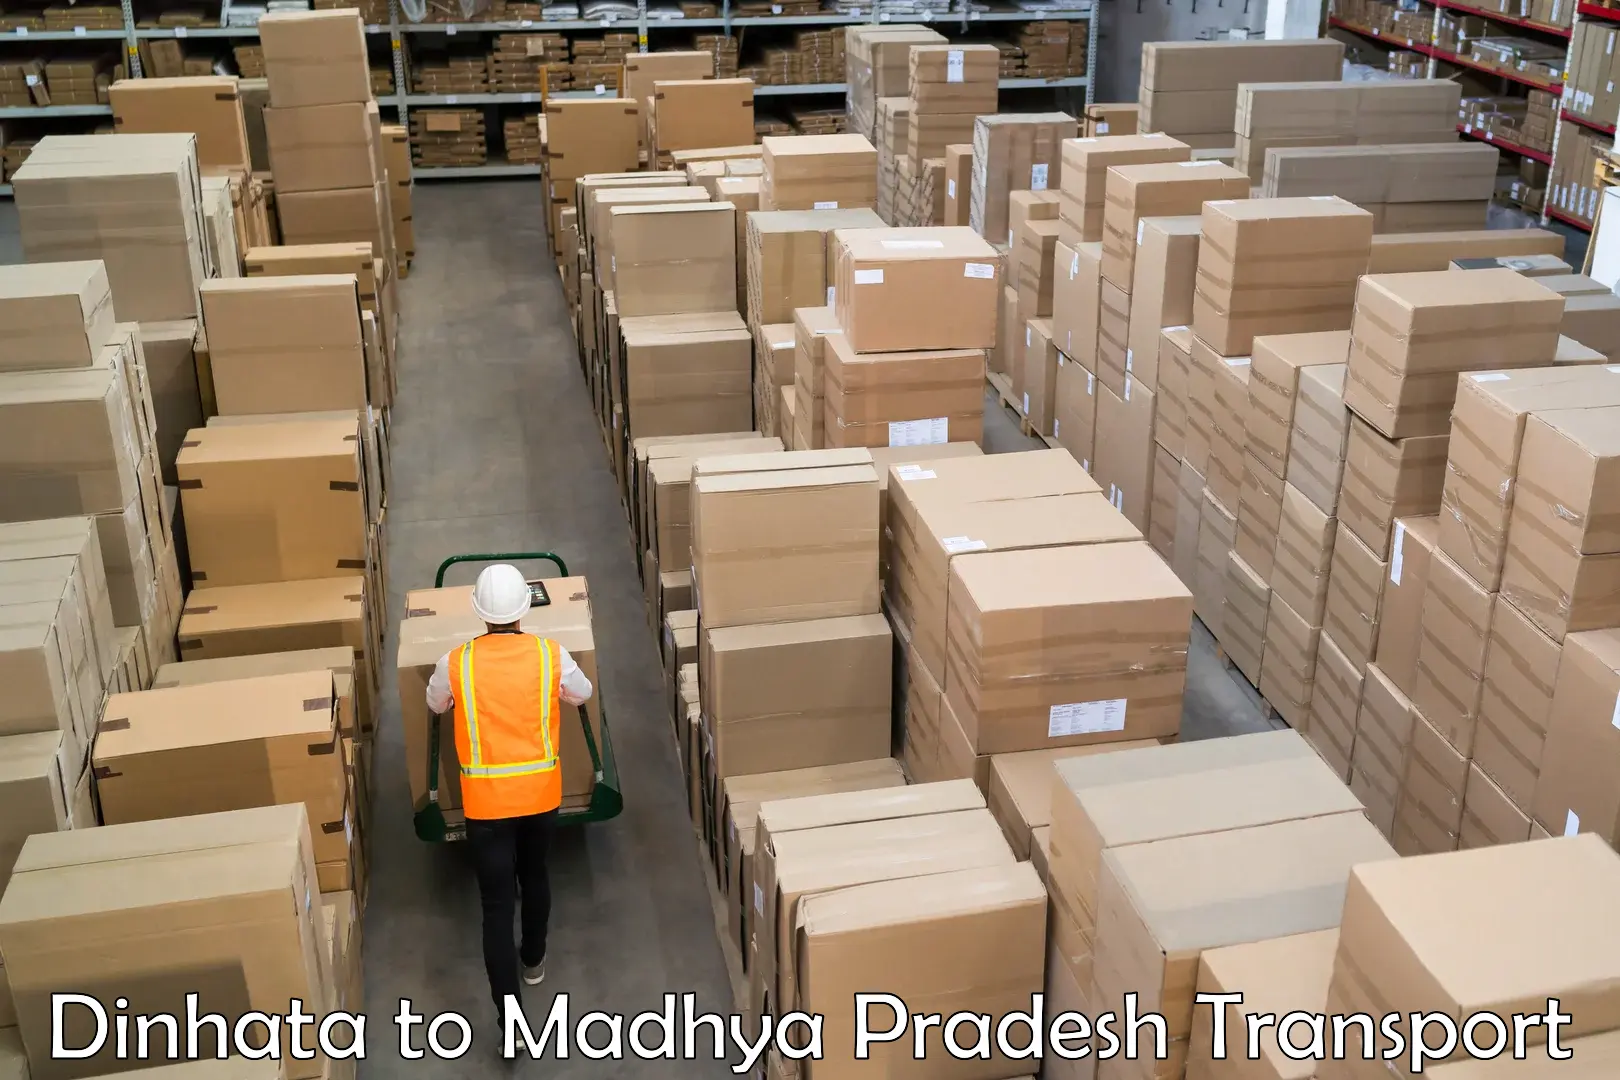 Truck transport companies in India Dinhata to Khandwa